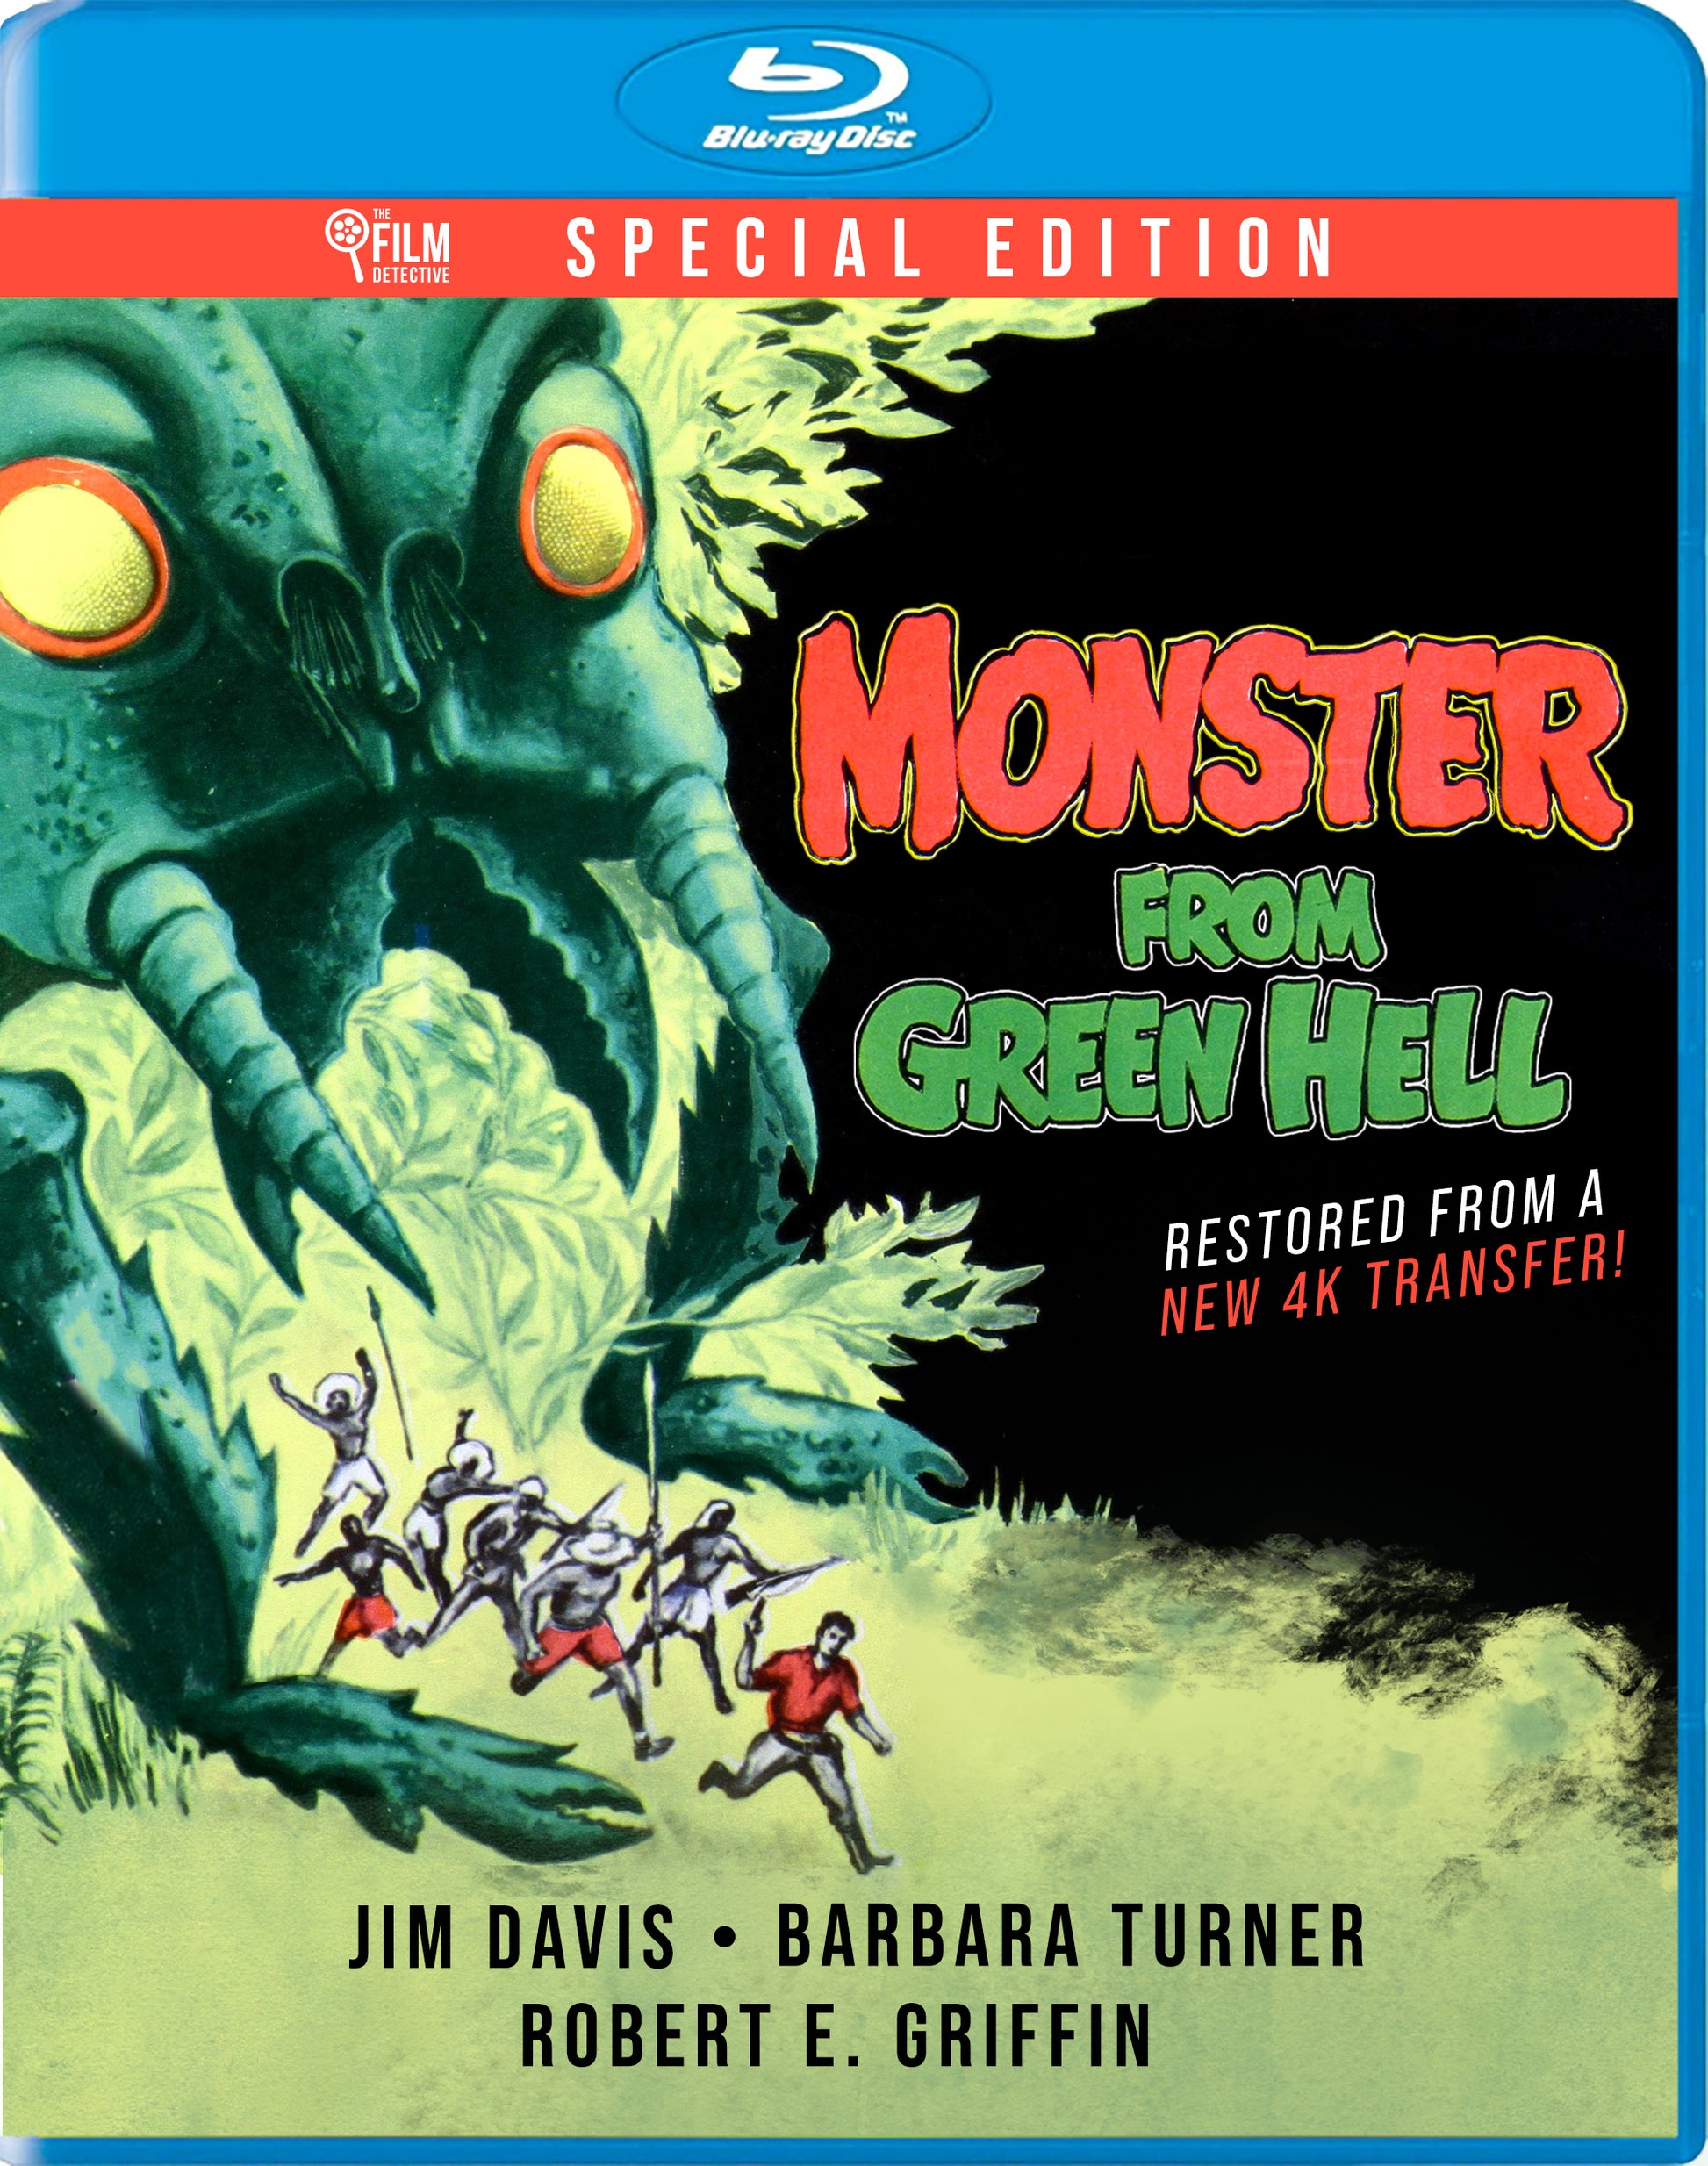 Monster from Green Hell [The Film Detective Special Edition] [Blu-ray] cover art